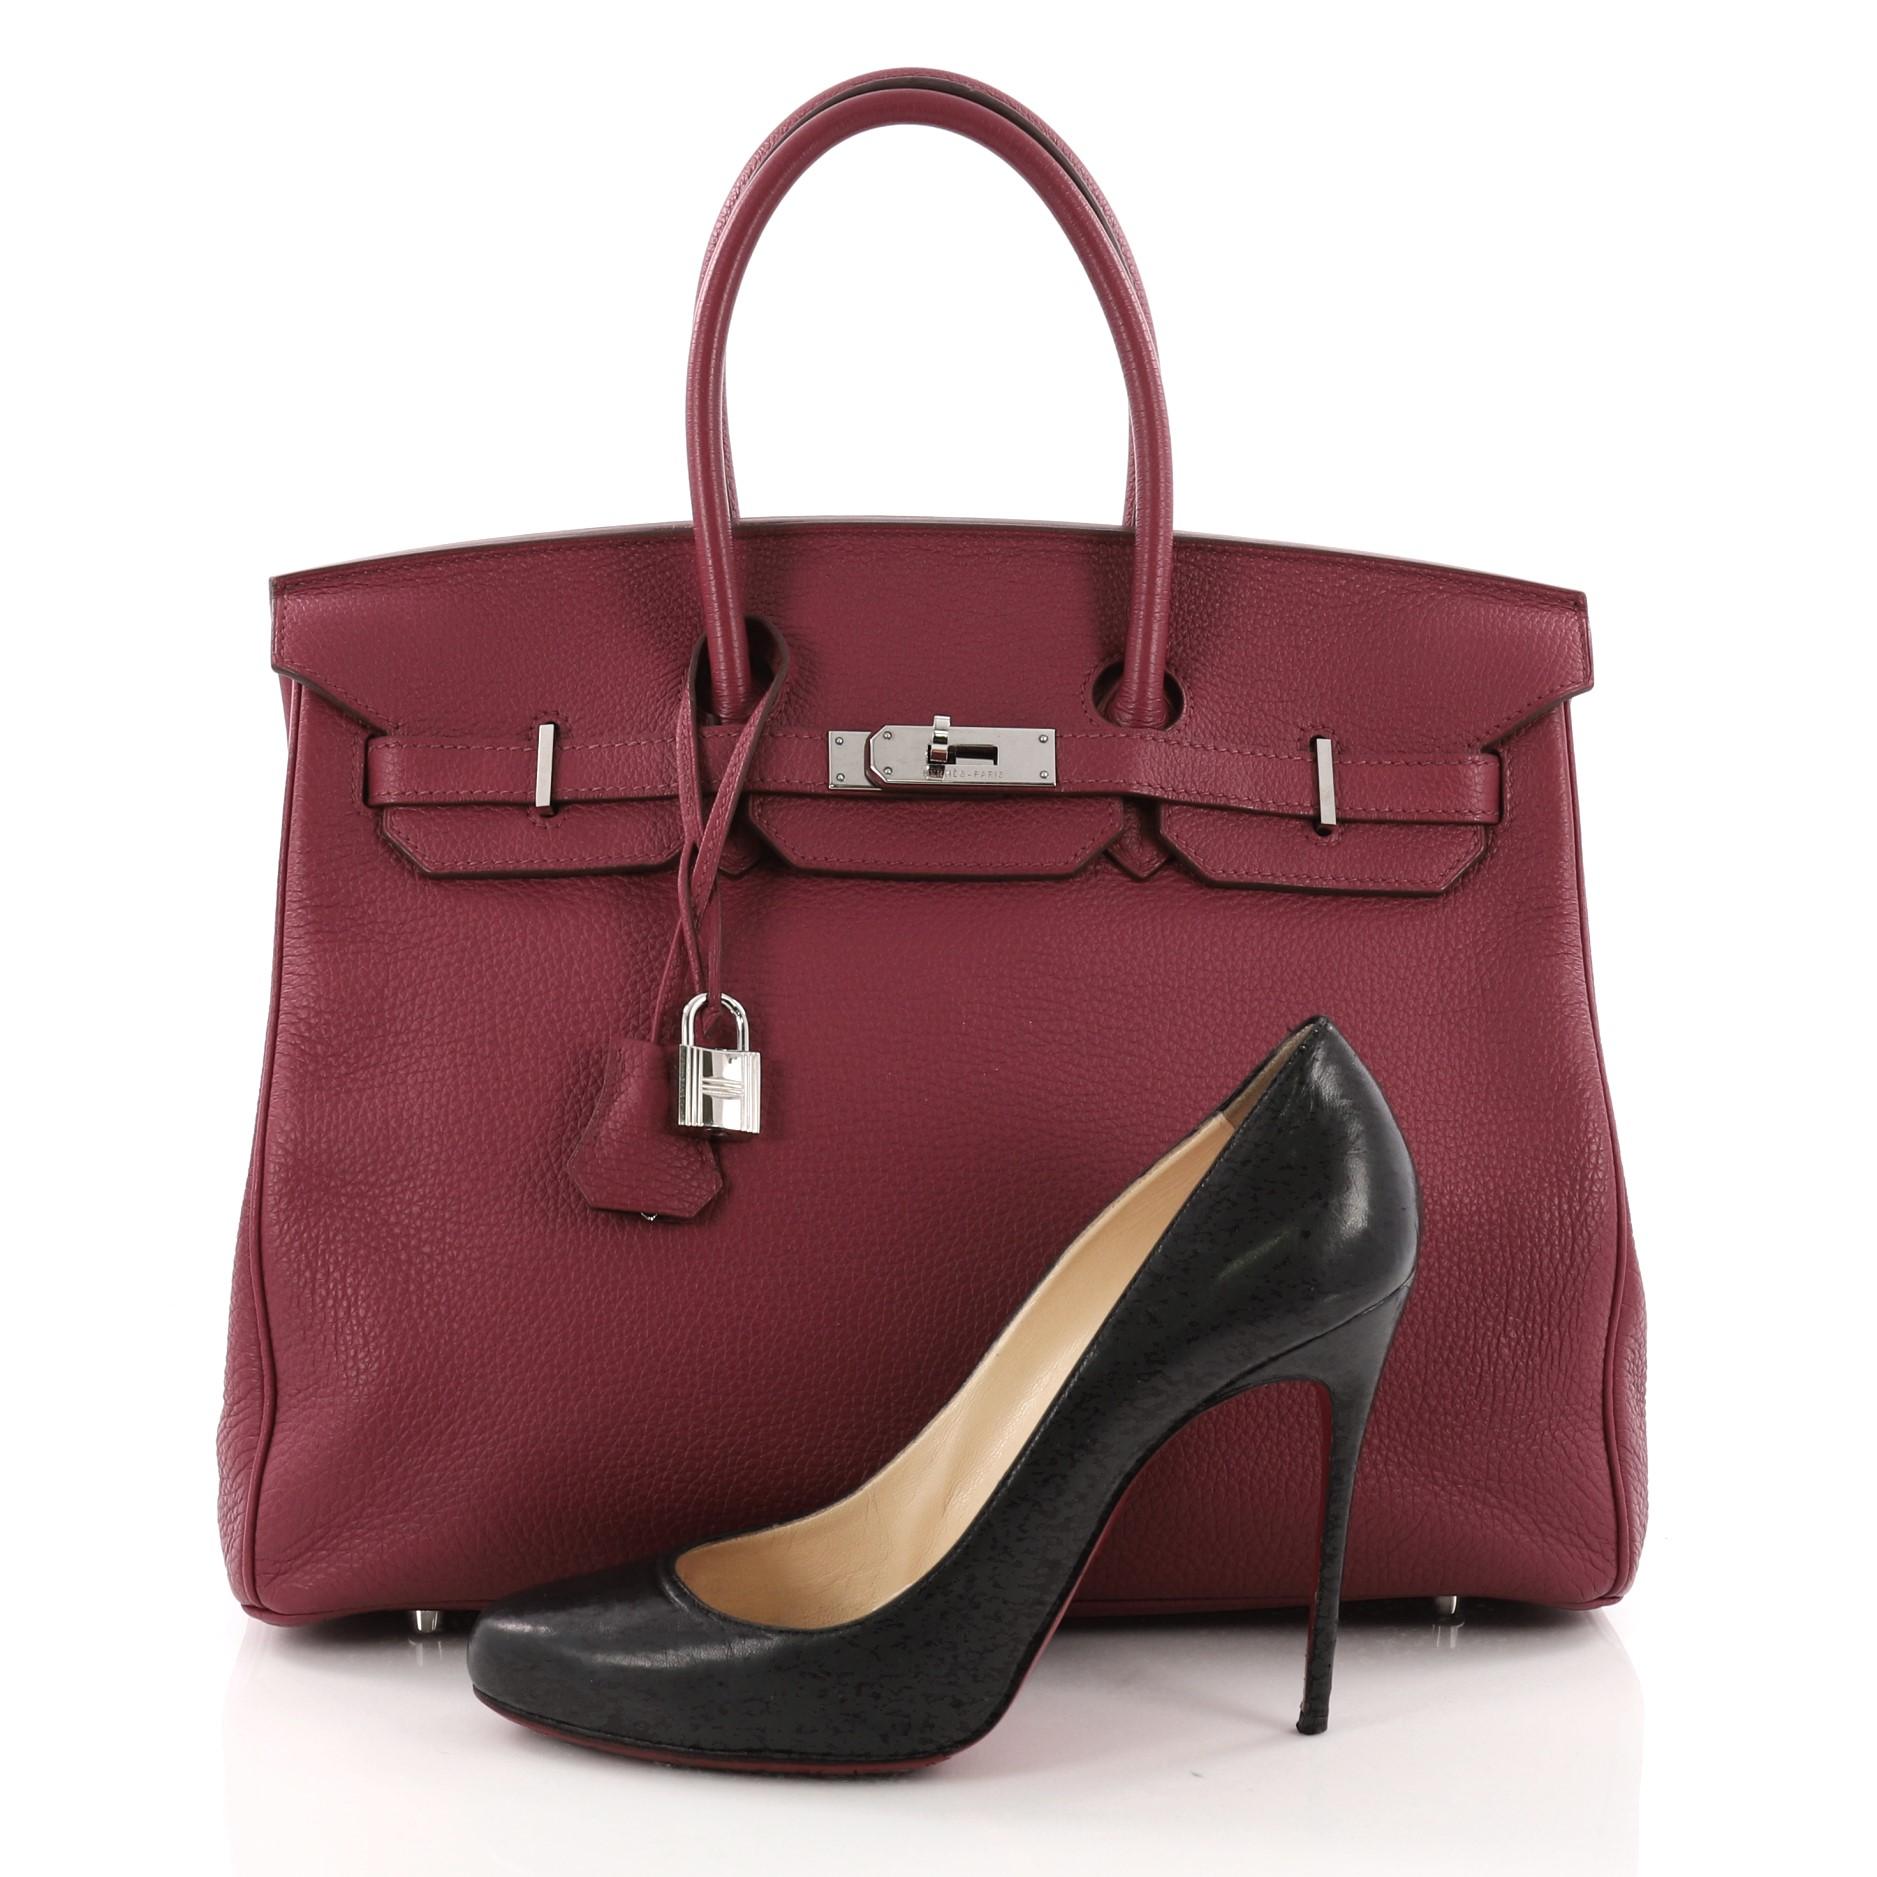 This Hermes Birkin Handbag Rubis Togo with Palladium Hardware 355, crafted from Rubis togo leather, features dual rolled handles, front flap and palladium-tone hardware. Its turn-lock closure opens to a pink leather interior with slip pocket. Date